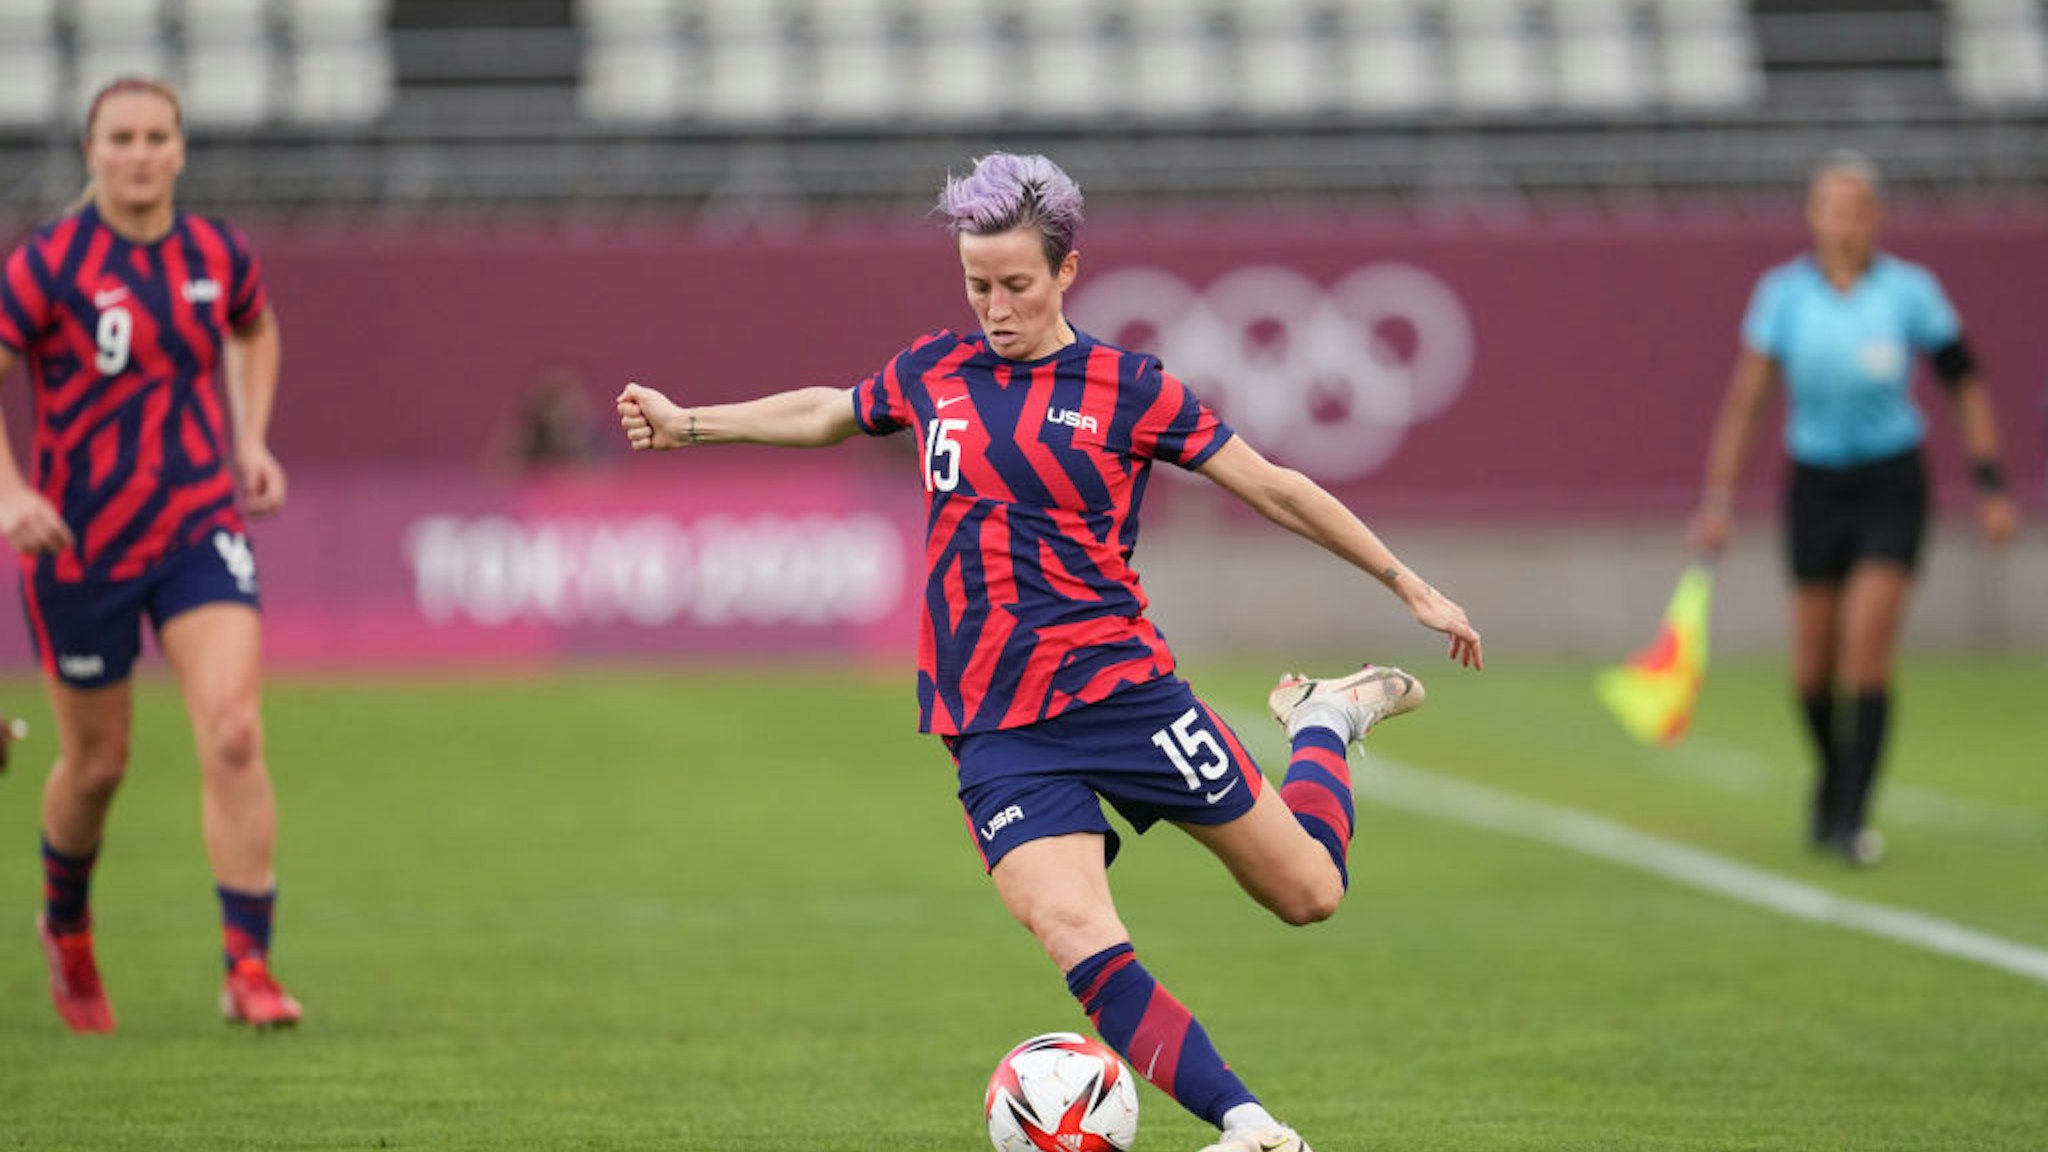 KASHIMA, JAPAN - AUGUST 5: Megan Rapinoe #15 of the United States during a game between Australia and USWNT at Kashima Soccer Stadium on August 5, 2021 in Kashima, Japan. (Photo by Brad Smith/ISI Photos/Getty Images)